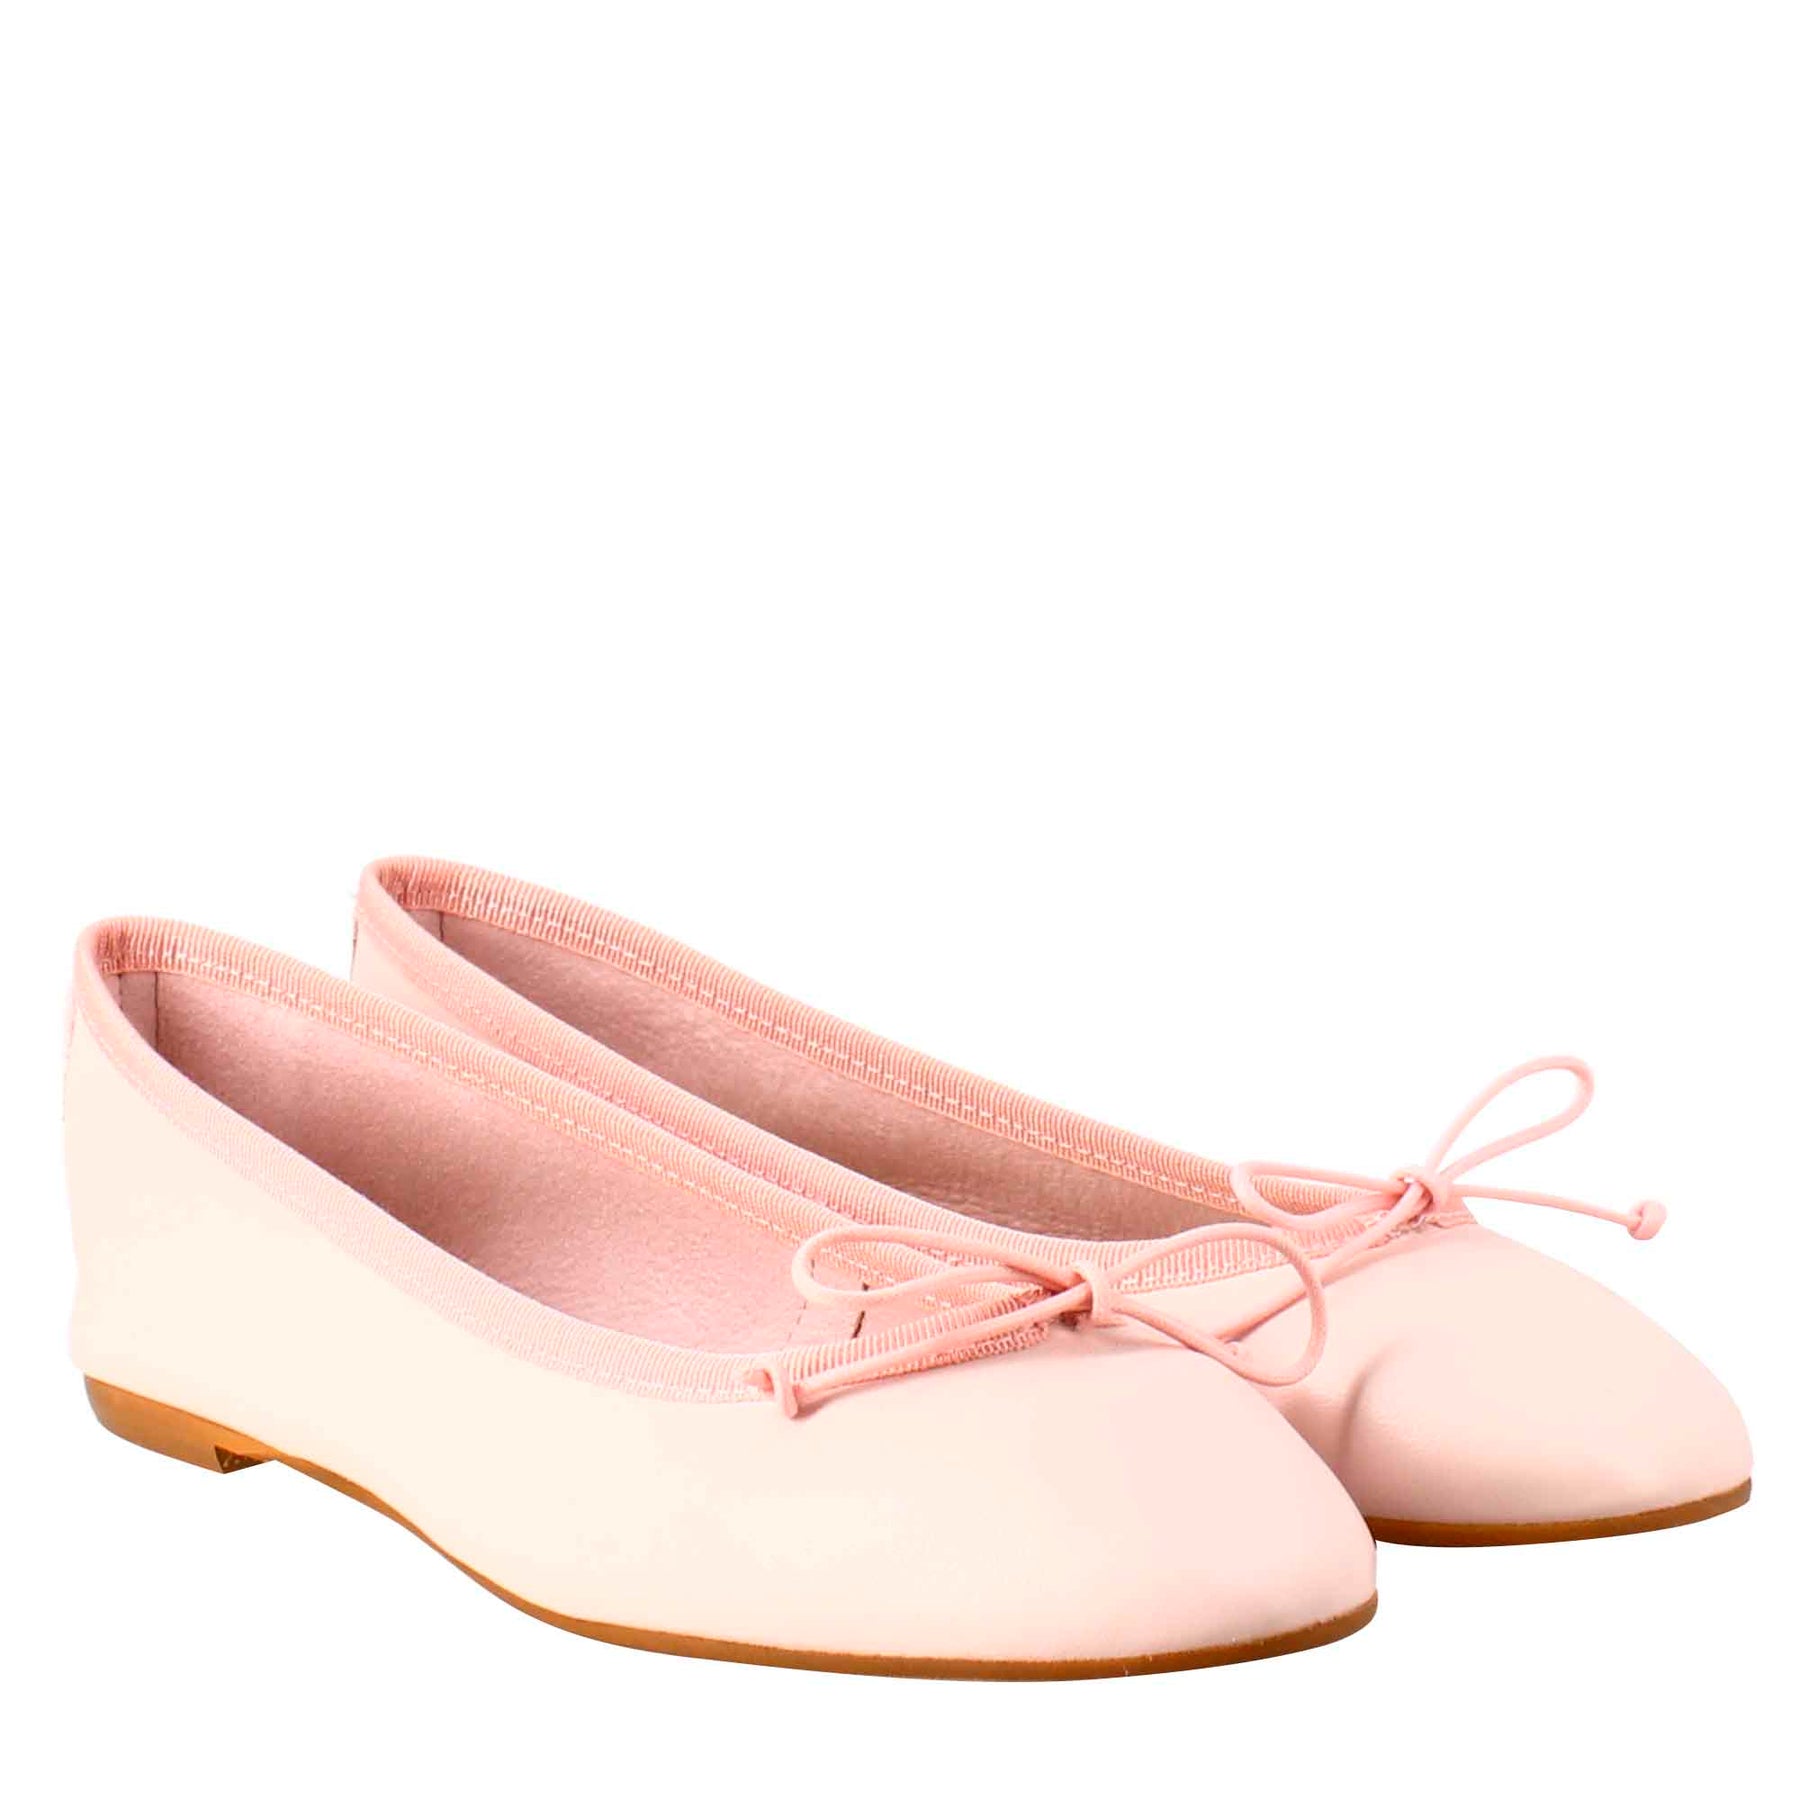 Light women's powder-colored ballet flats in smooth leather